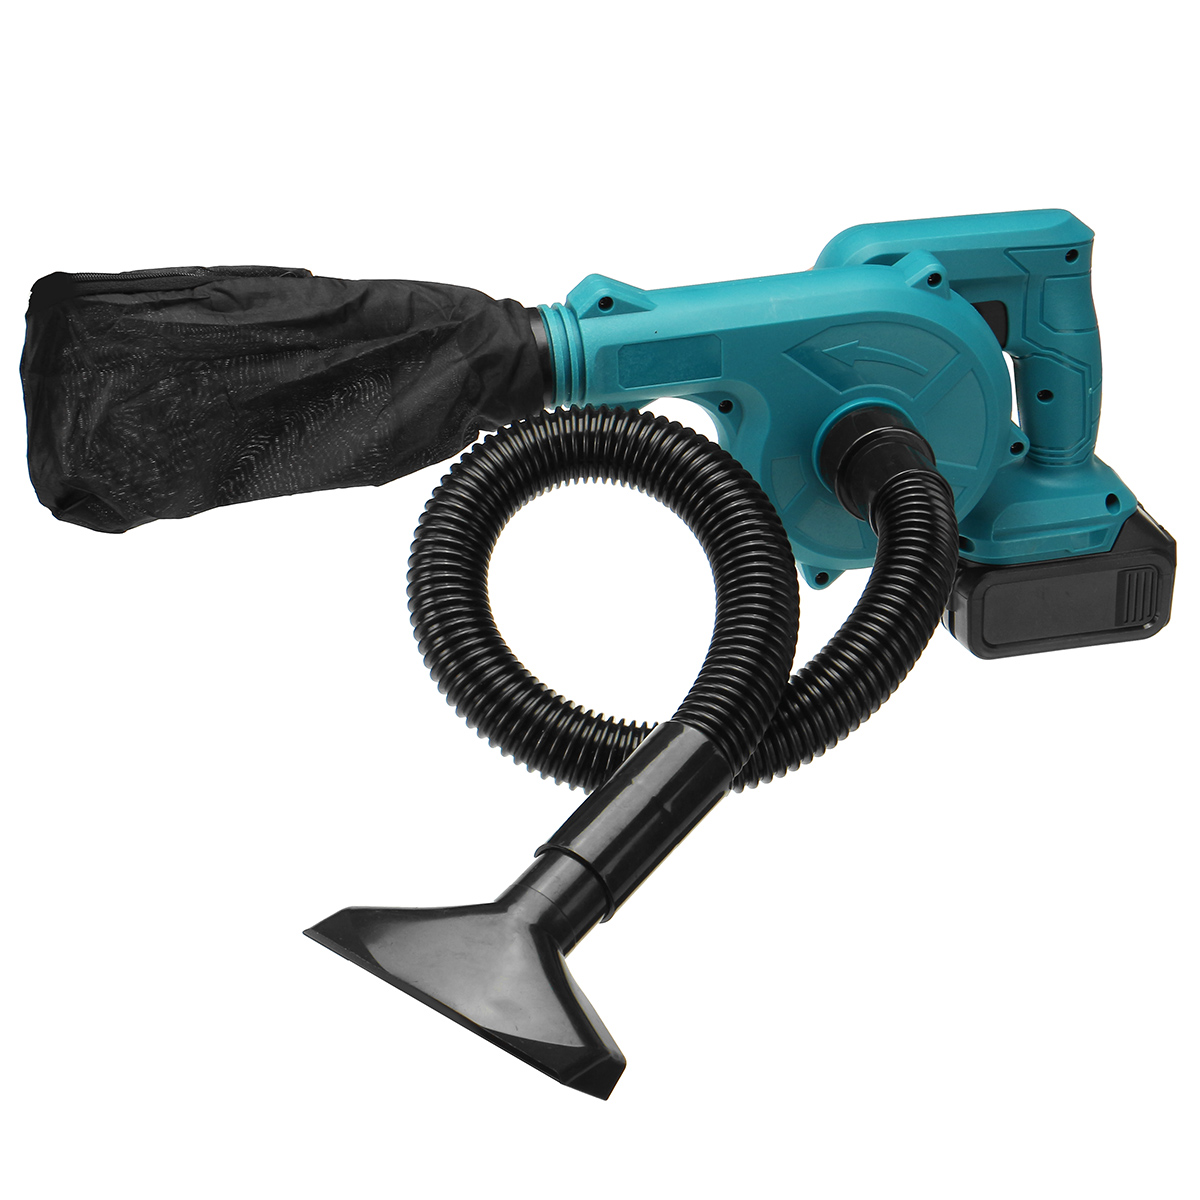 Find 2 in 1 Electric Air Blower Vacuum Cleaner Handheld Dust Collecting Tool For Makita 18V Battery for Sale on Gipsybee.com with cryptocurrencies